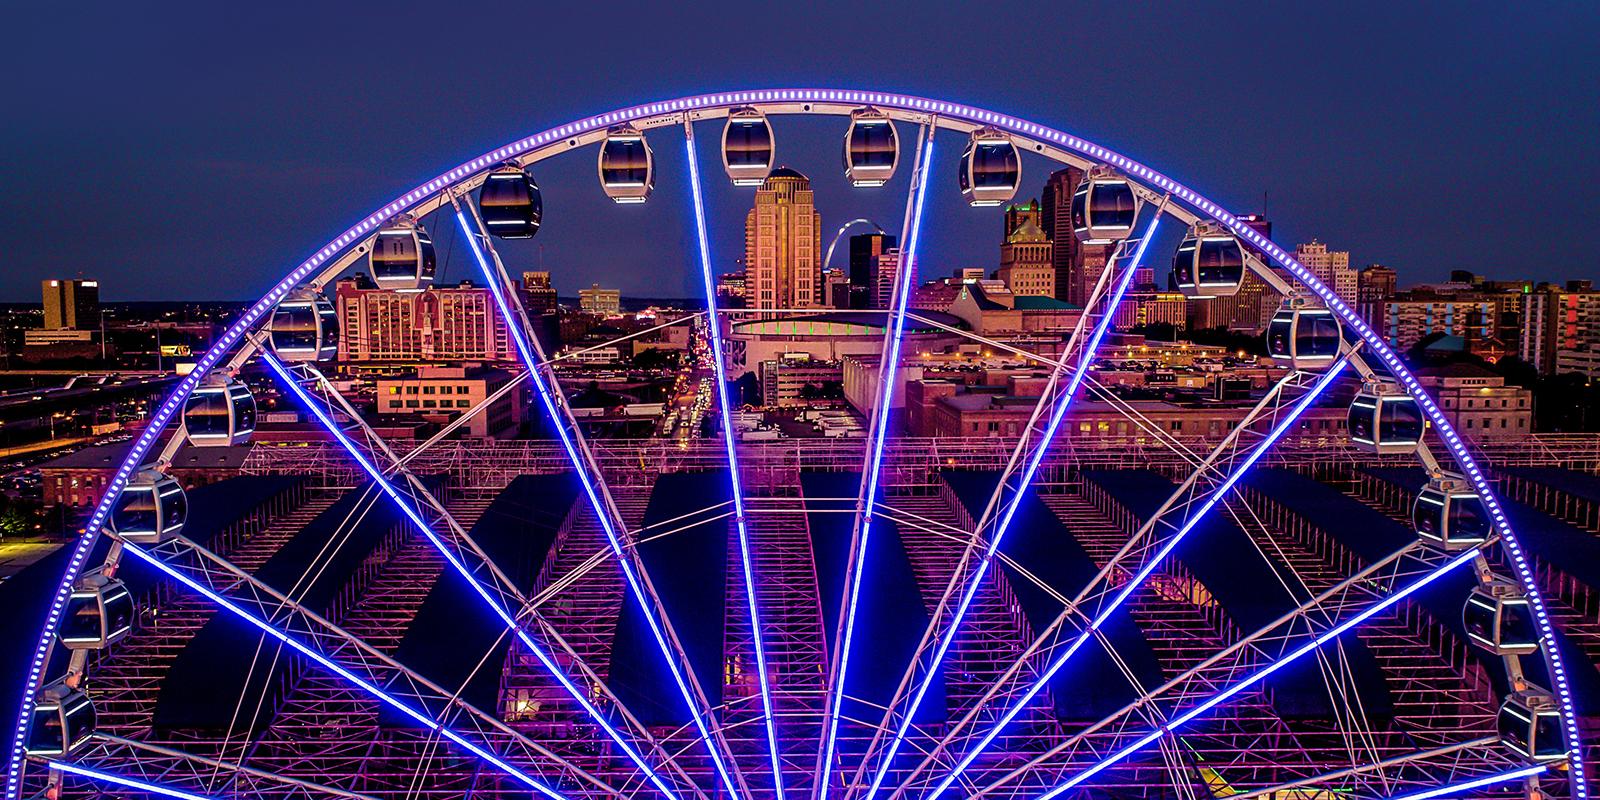 The St. Louis Wheel at Union Station glowing against the nighttime St. Louis skyline.